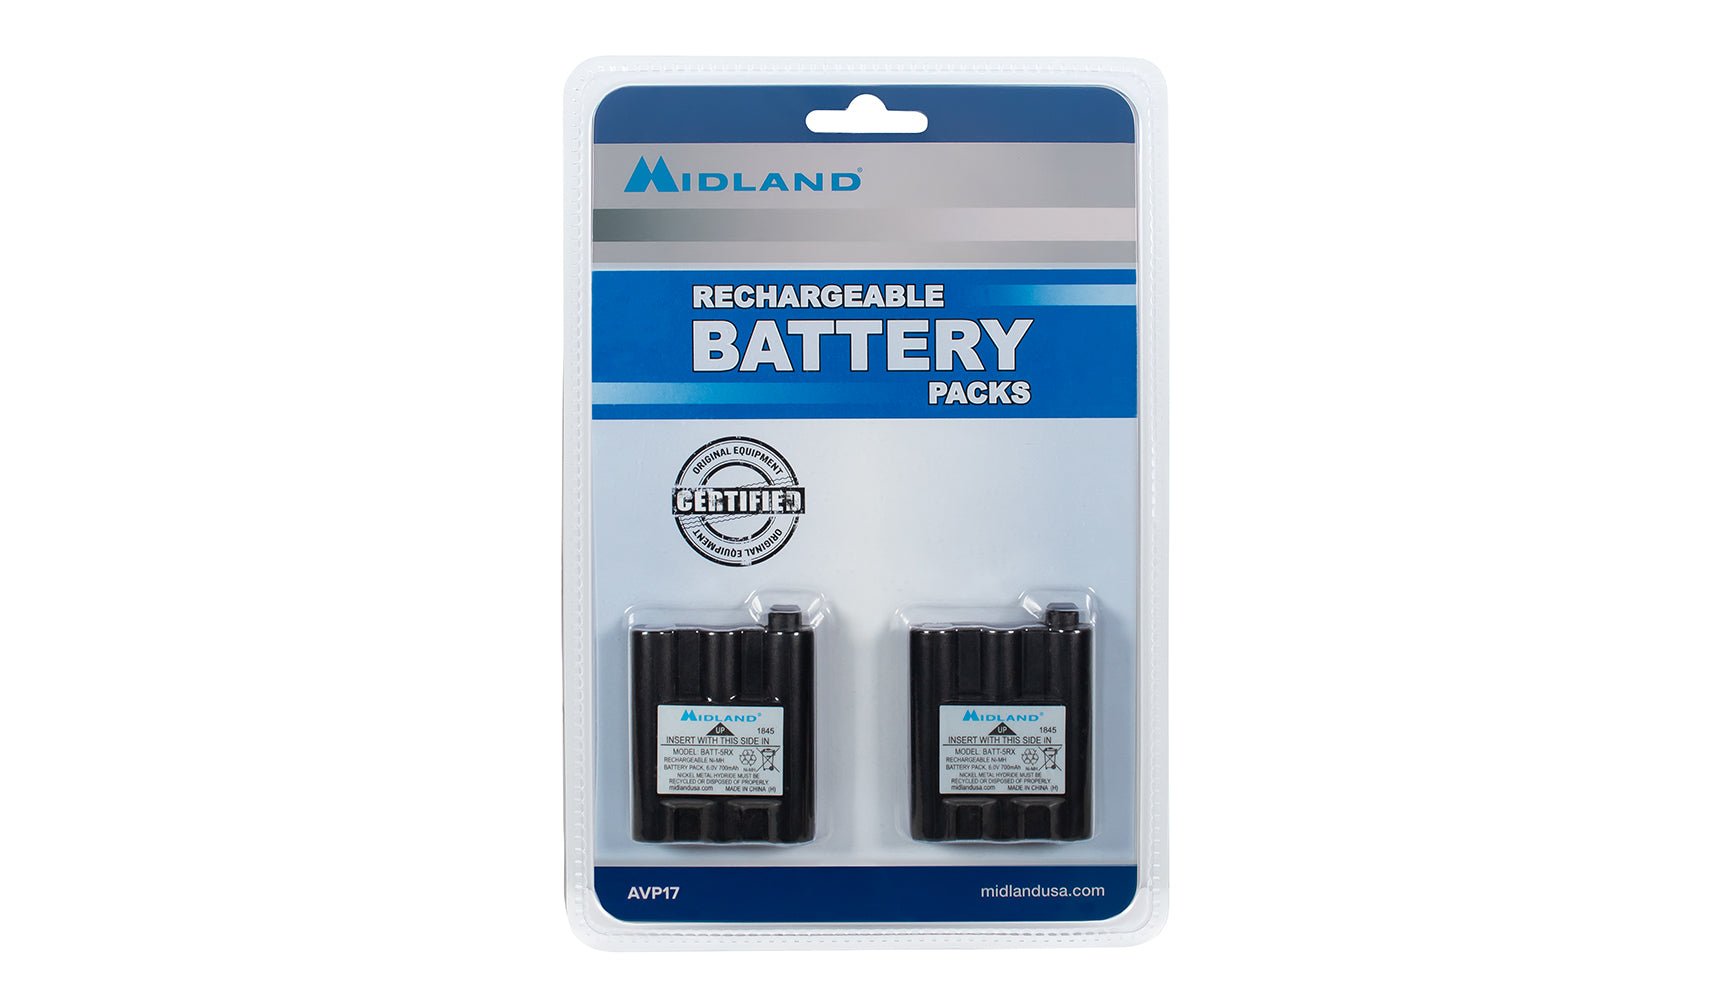 Midland Radio Rechargeable Battery Pack AVP17